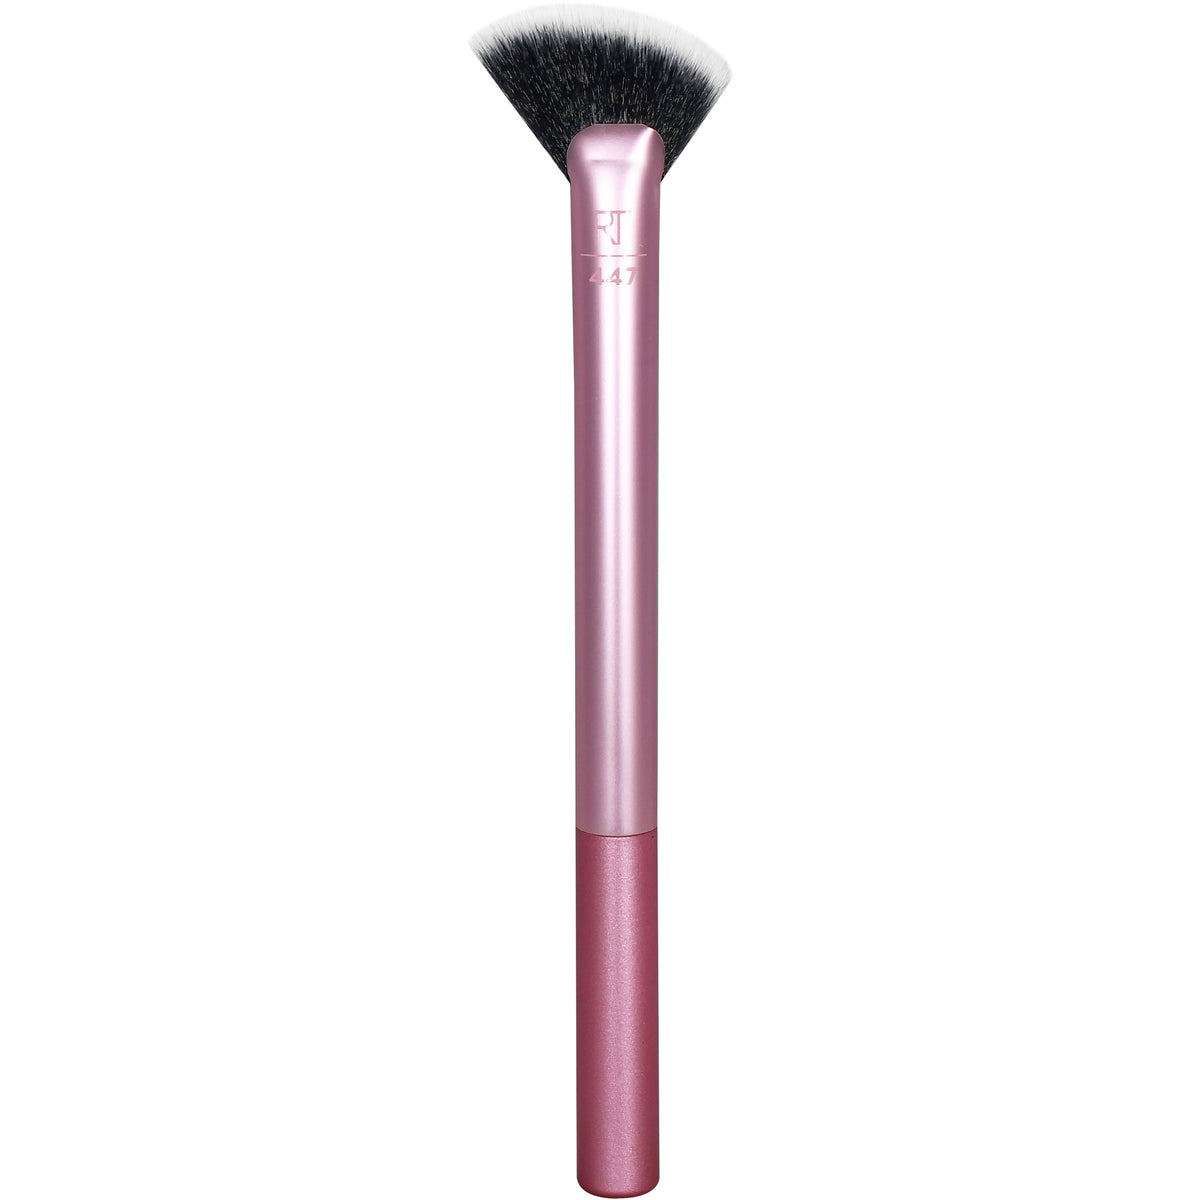 Real Techniques Sheer Radiance Fan Makeup Brush, Fan Head For Precisie Highlighter Powder Application, Soft Bristles, Pink Face Brush, 1 Count RealTechniques.com